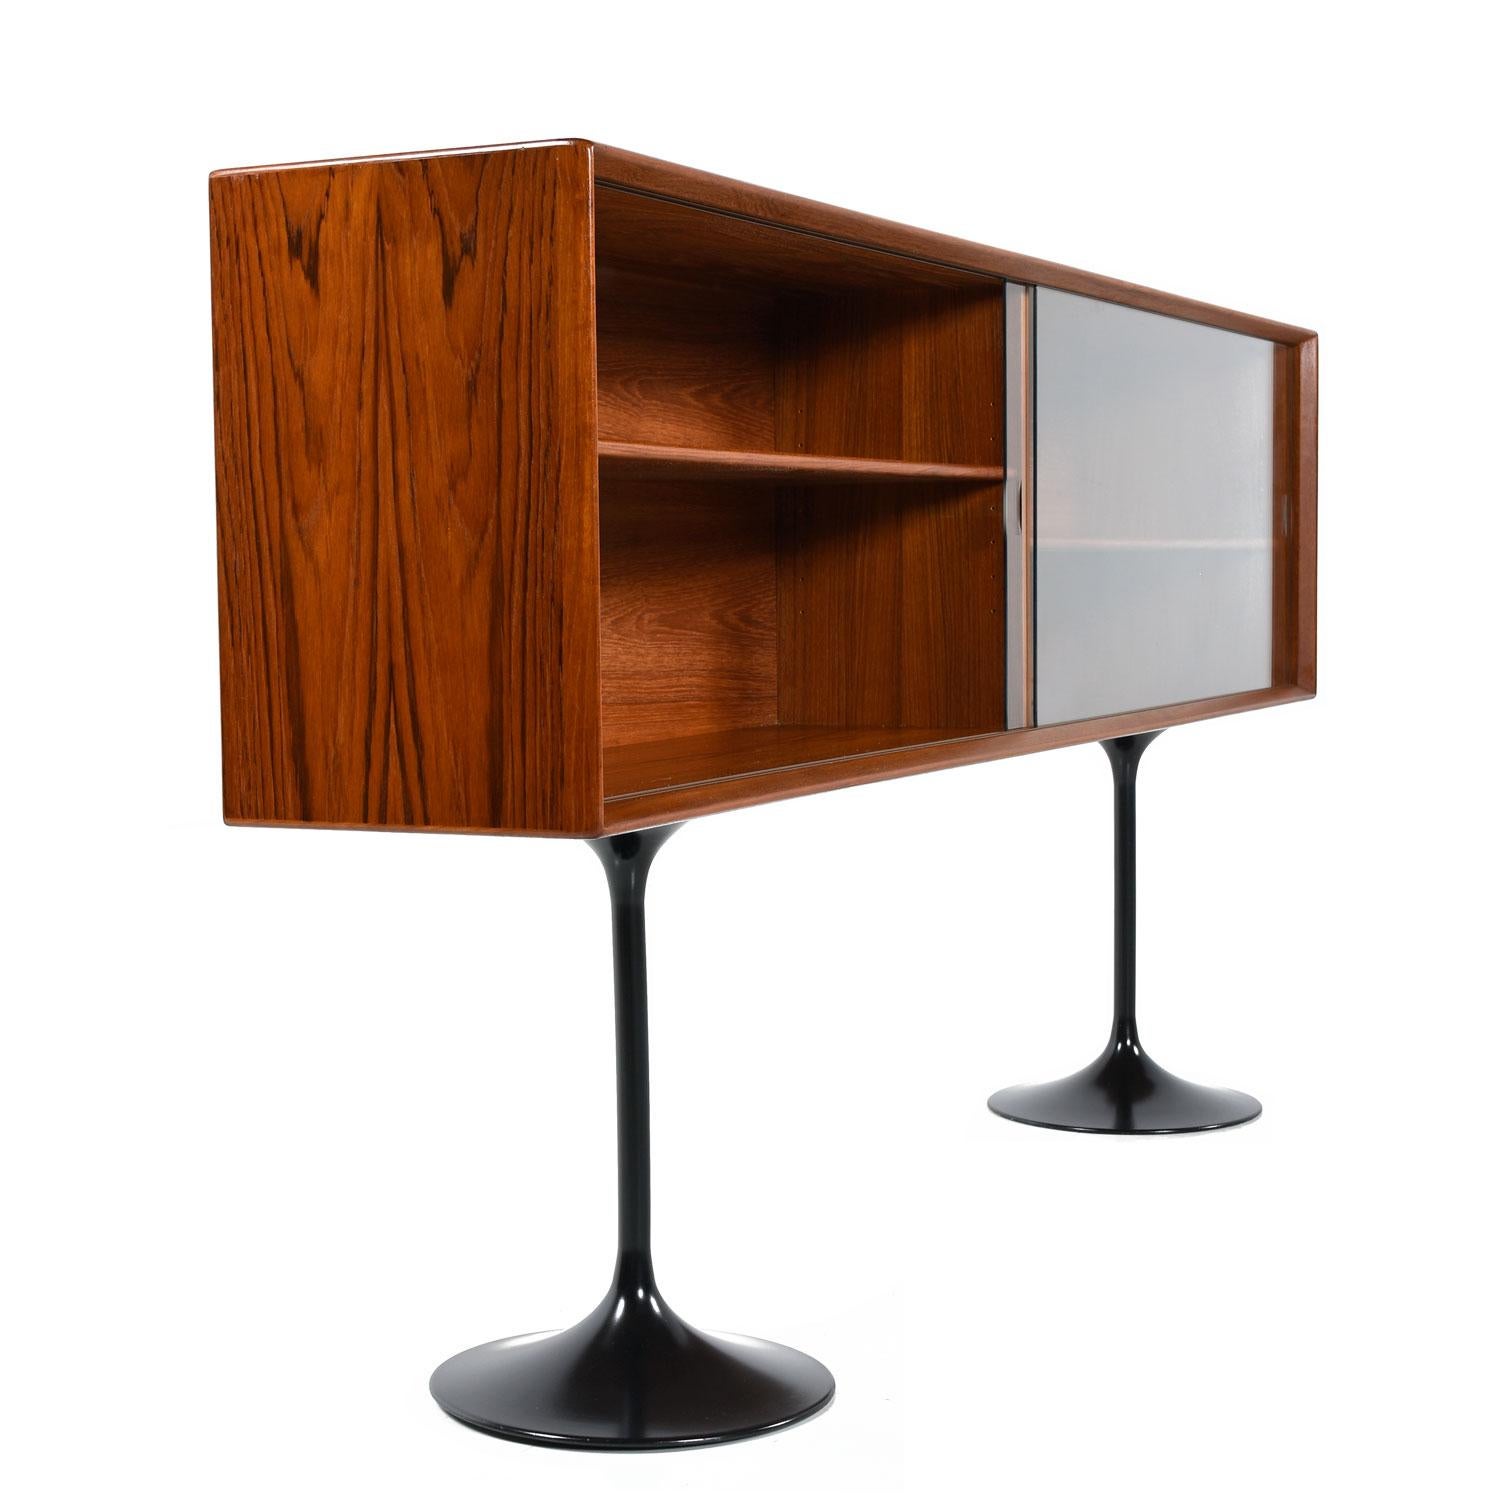 Mid-century Scandinavian Modern Danish teak bookcase console cabinet credenza by Dyrlund. Made in Denmark, vintage 1960s, teak wood construction. The unit is finished on back side and can be used as a room divider. This credenza as a prime example